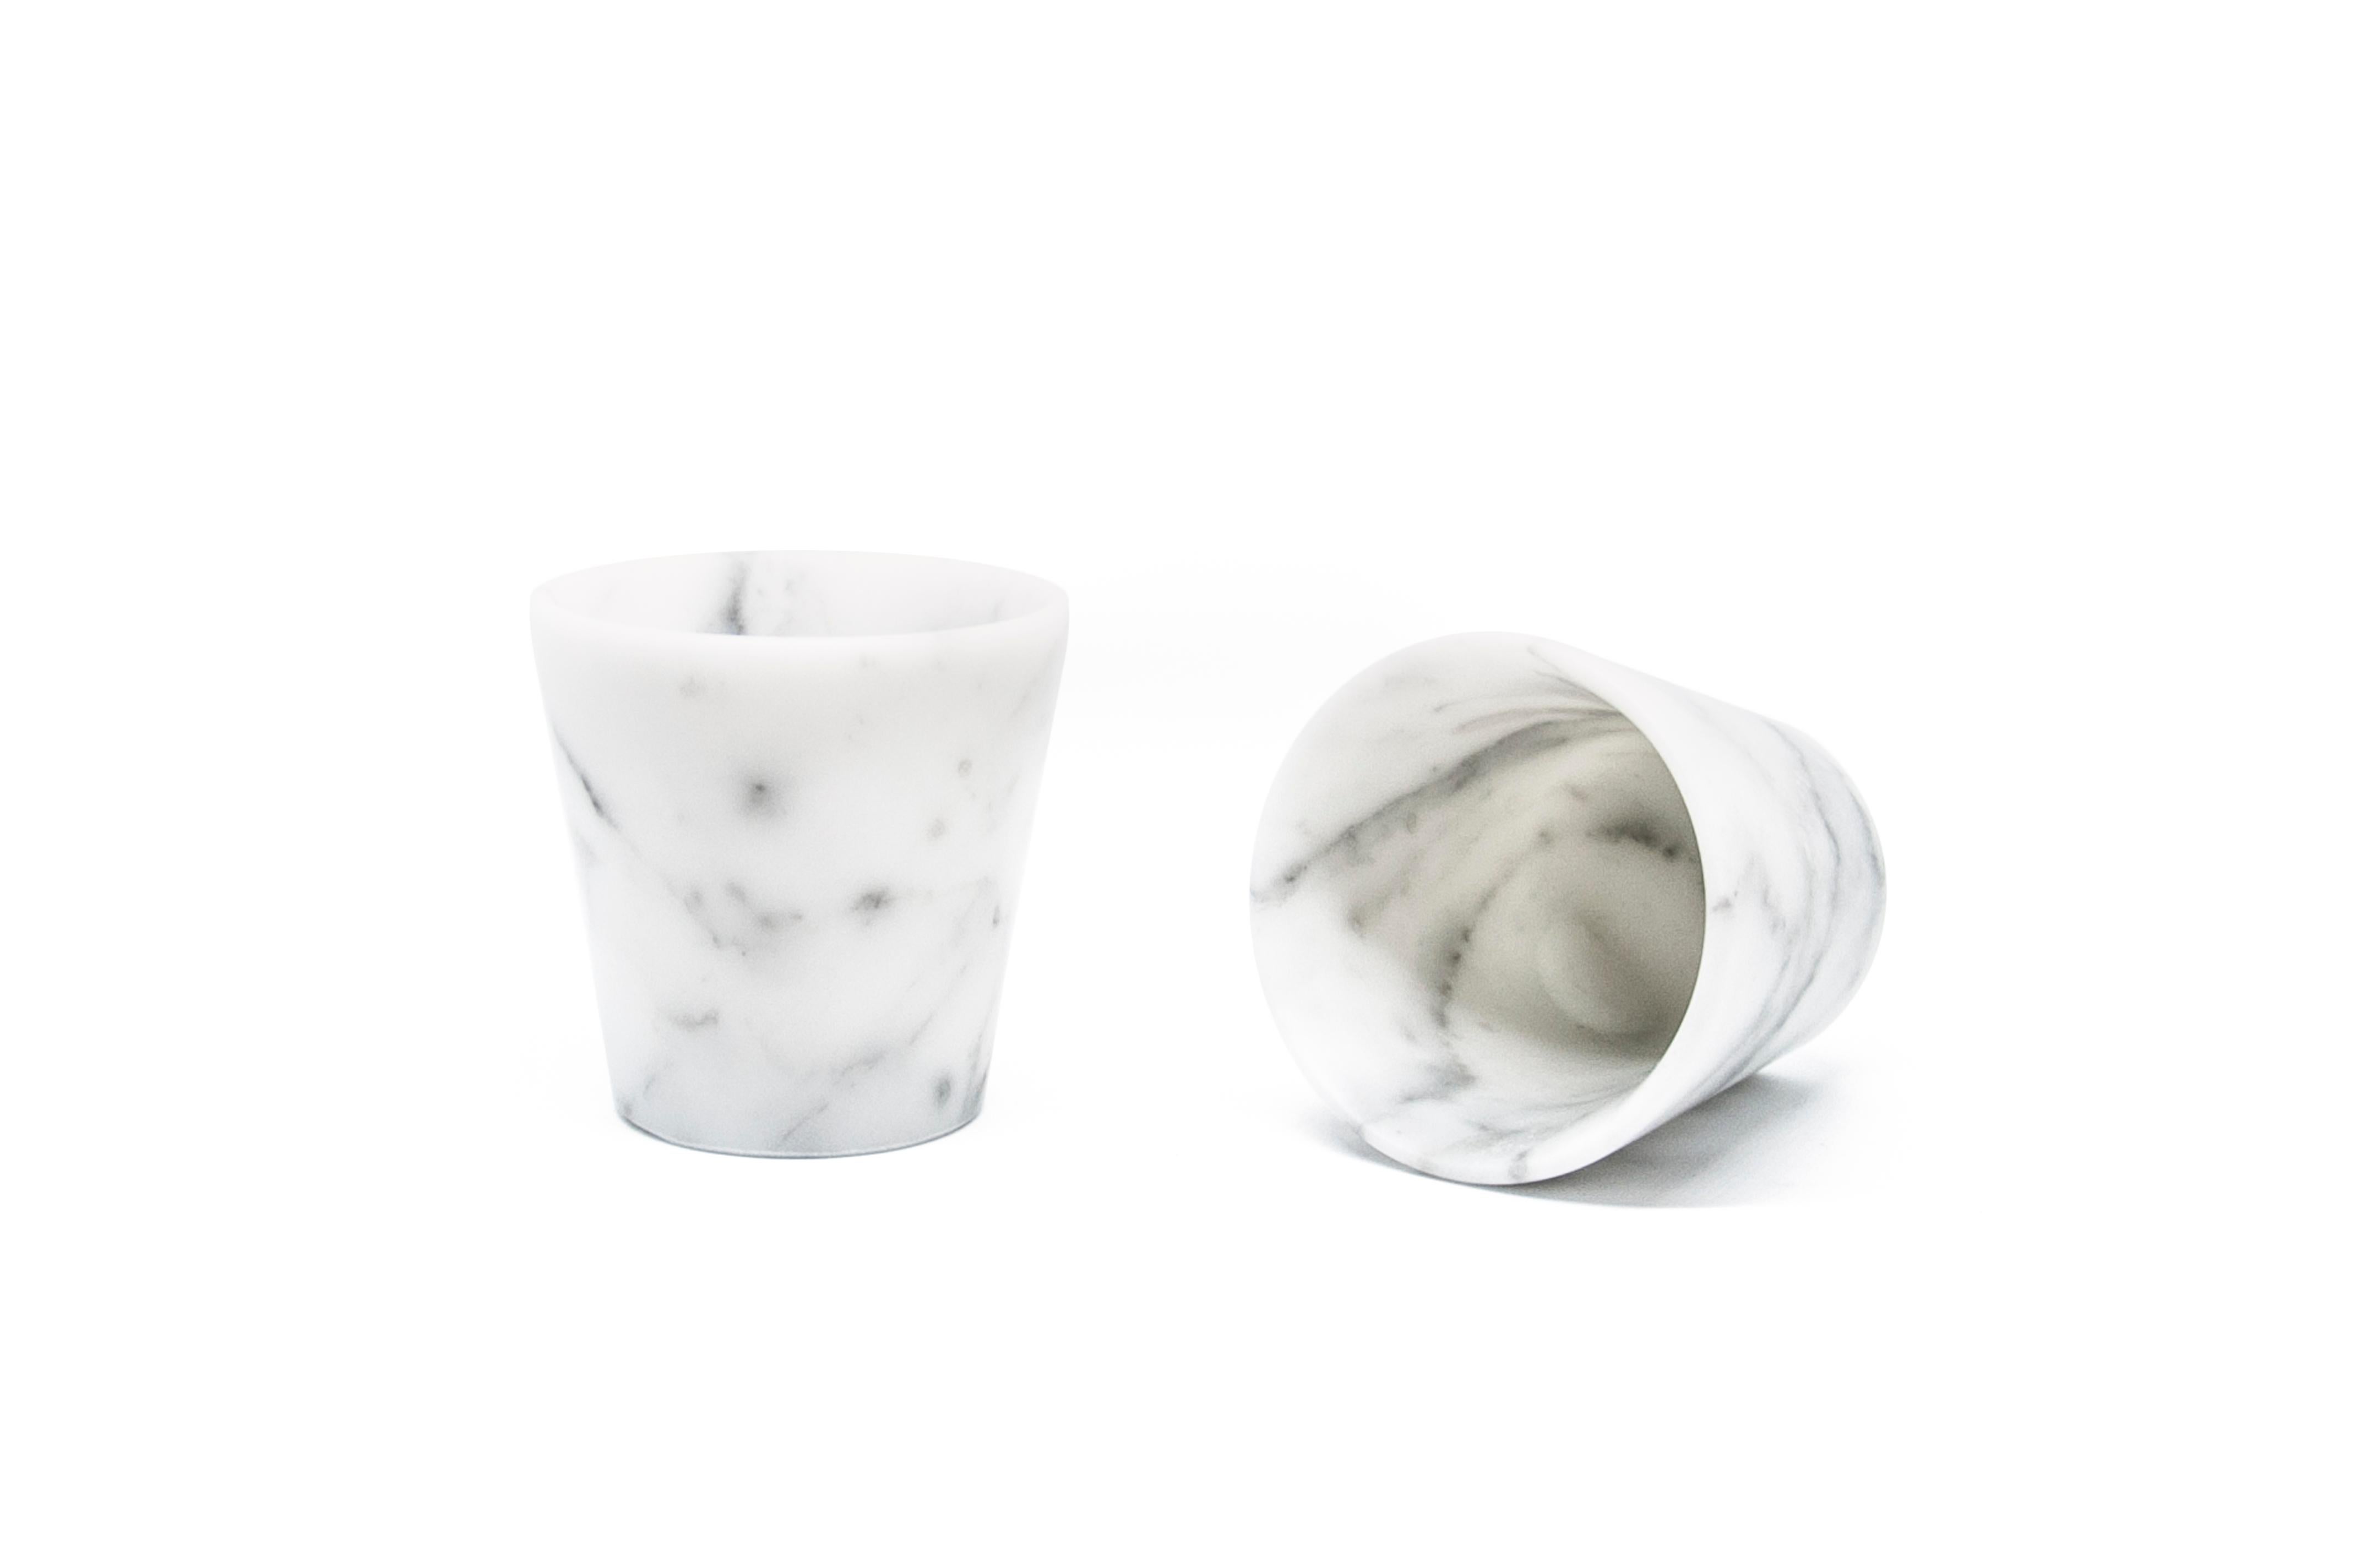 Set of 2 grappa glasses in satin white Carrara marble, extracted and processed in Italy. You have a 100% made in Italy product.
Each piece is in a way unique (since each marble block is different in veins and shades) and handmade by Italian